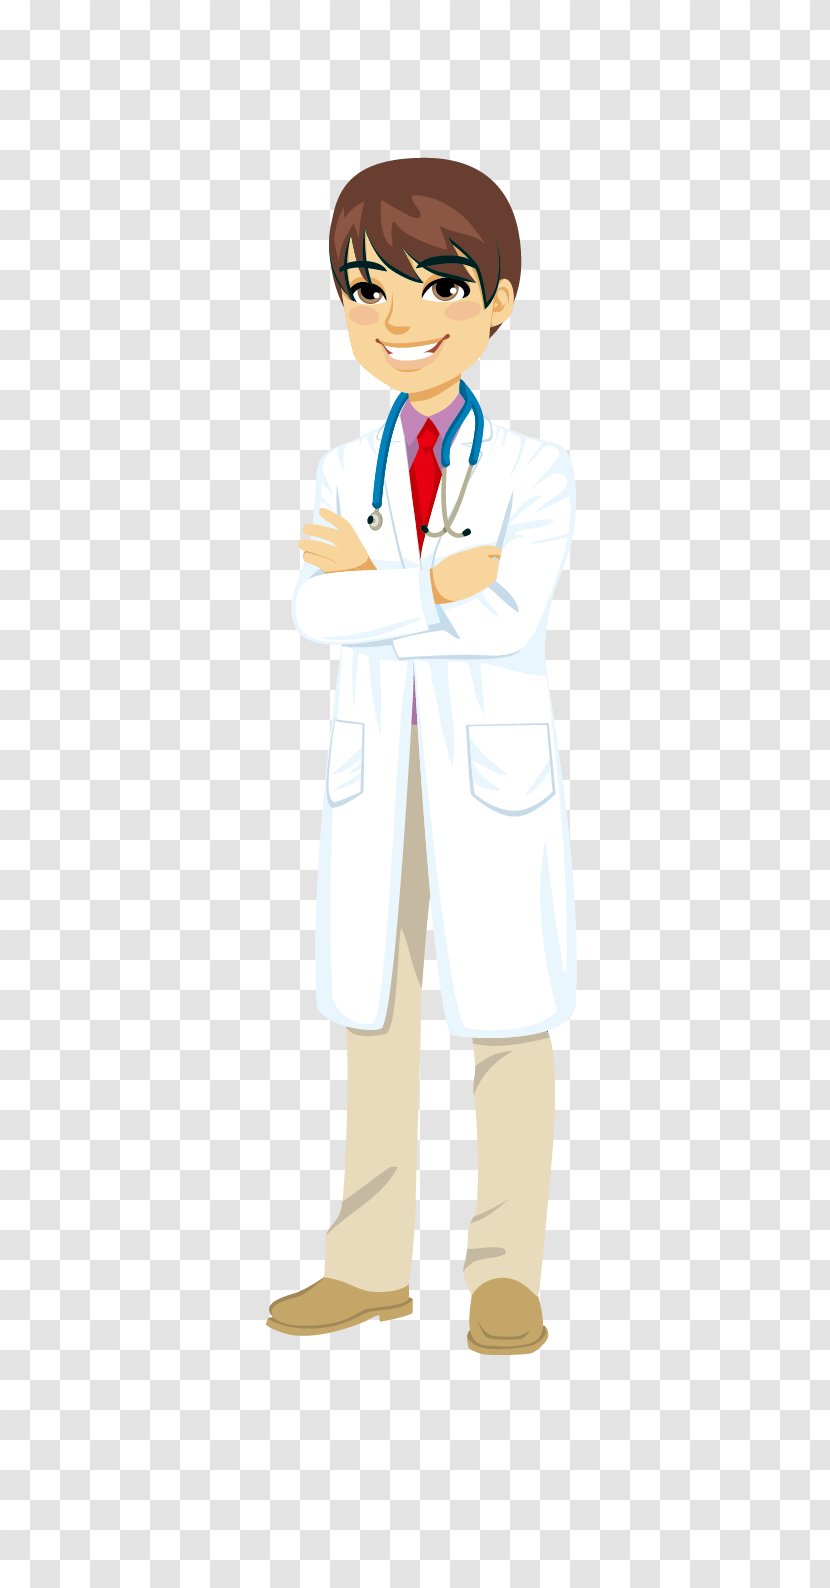 Physician Cartoon Professional Drawing Illustration - Flower - Doctor Transparent PNG